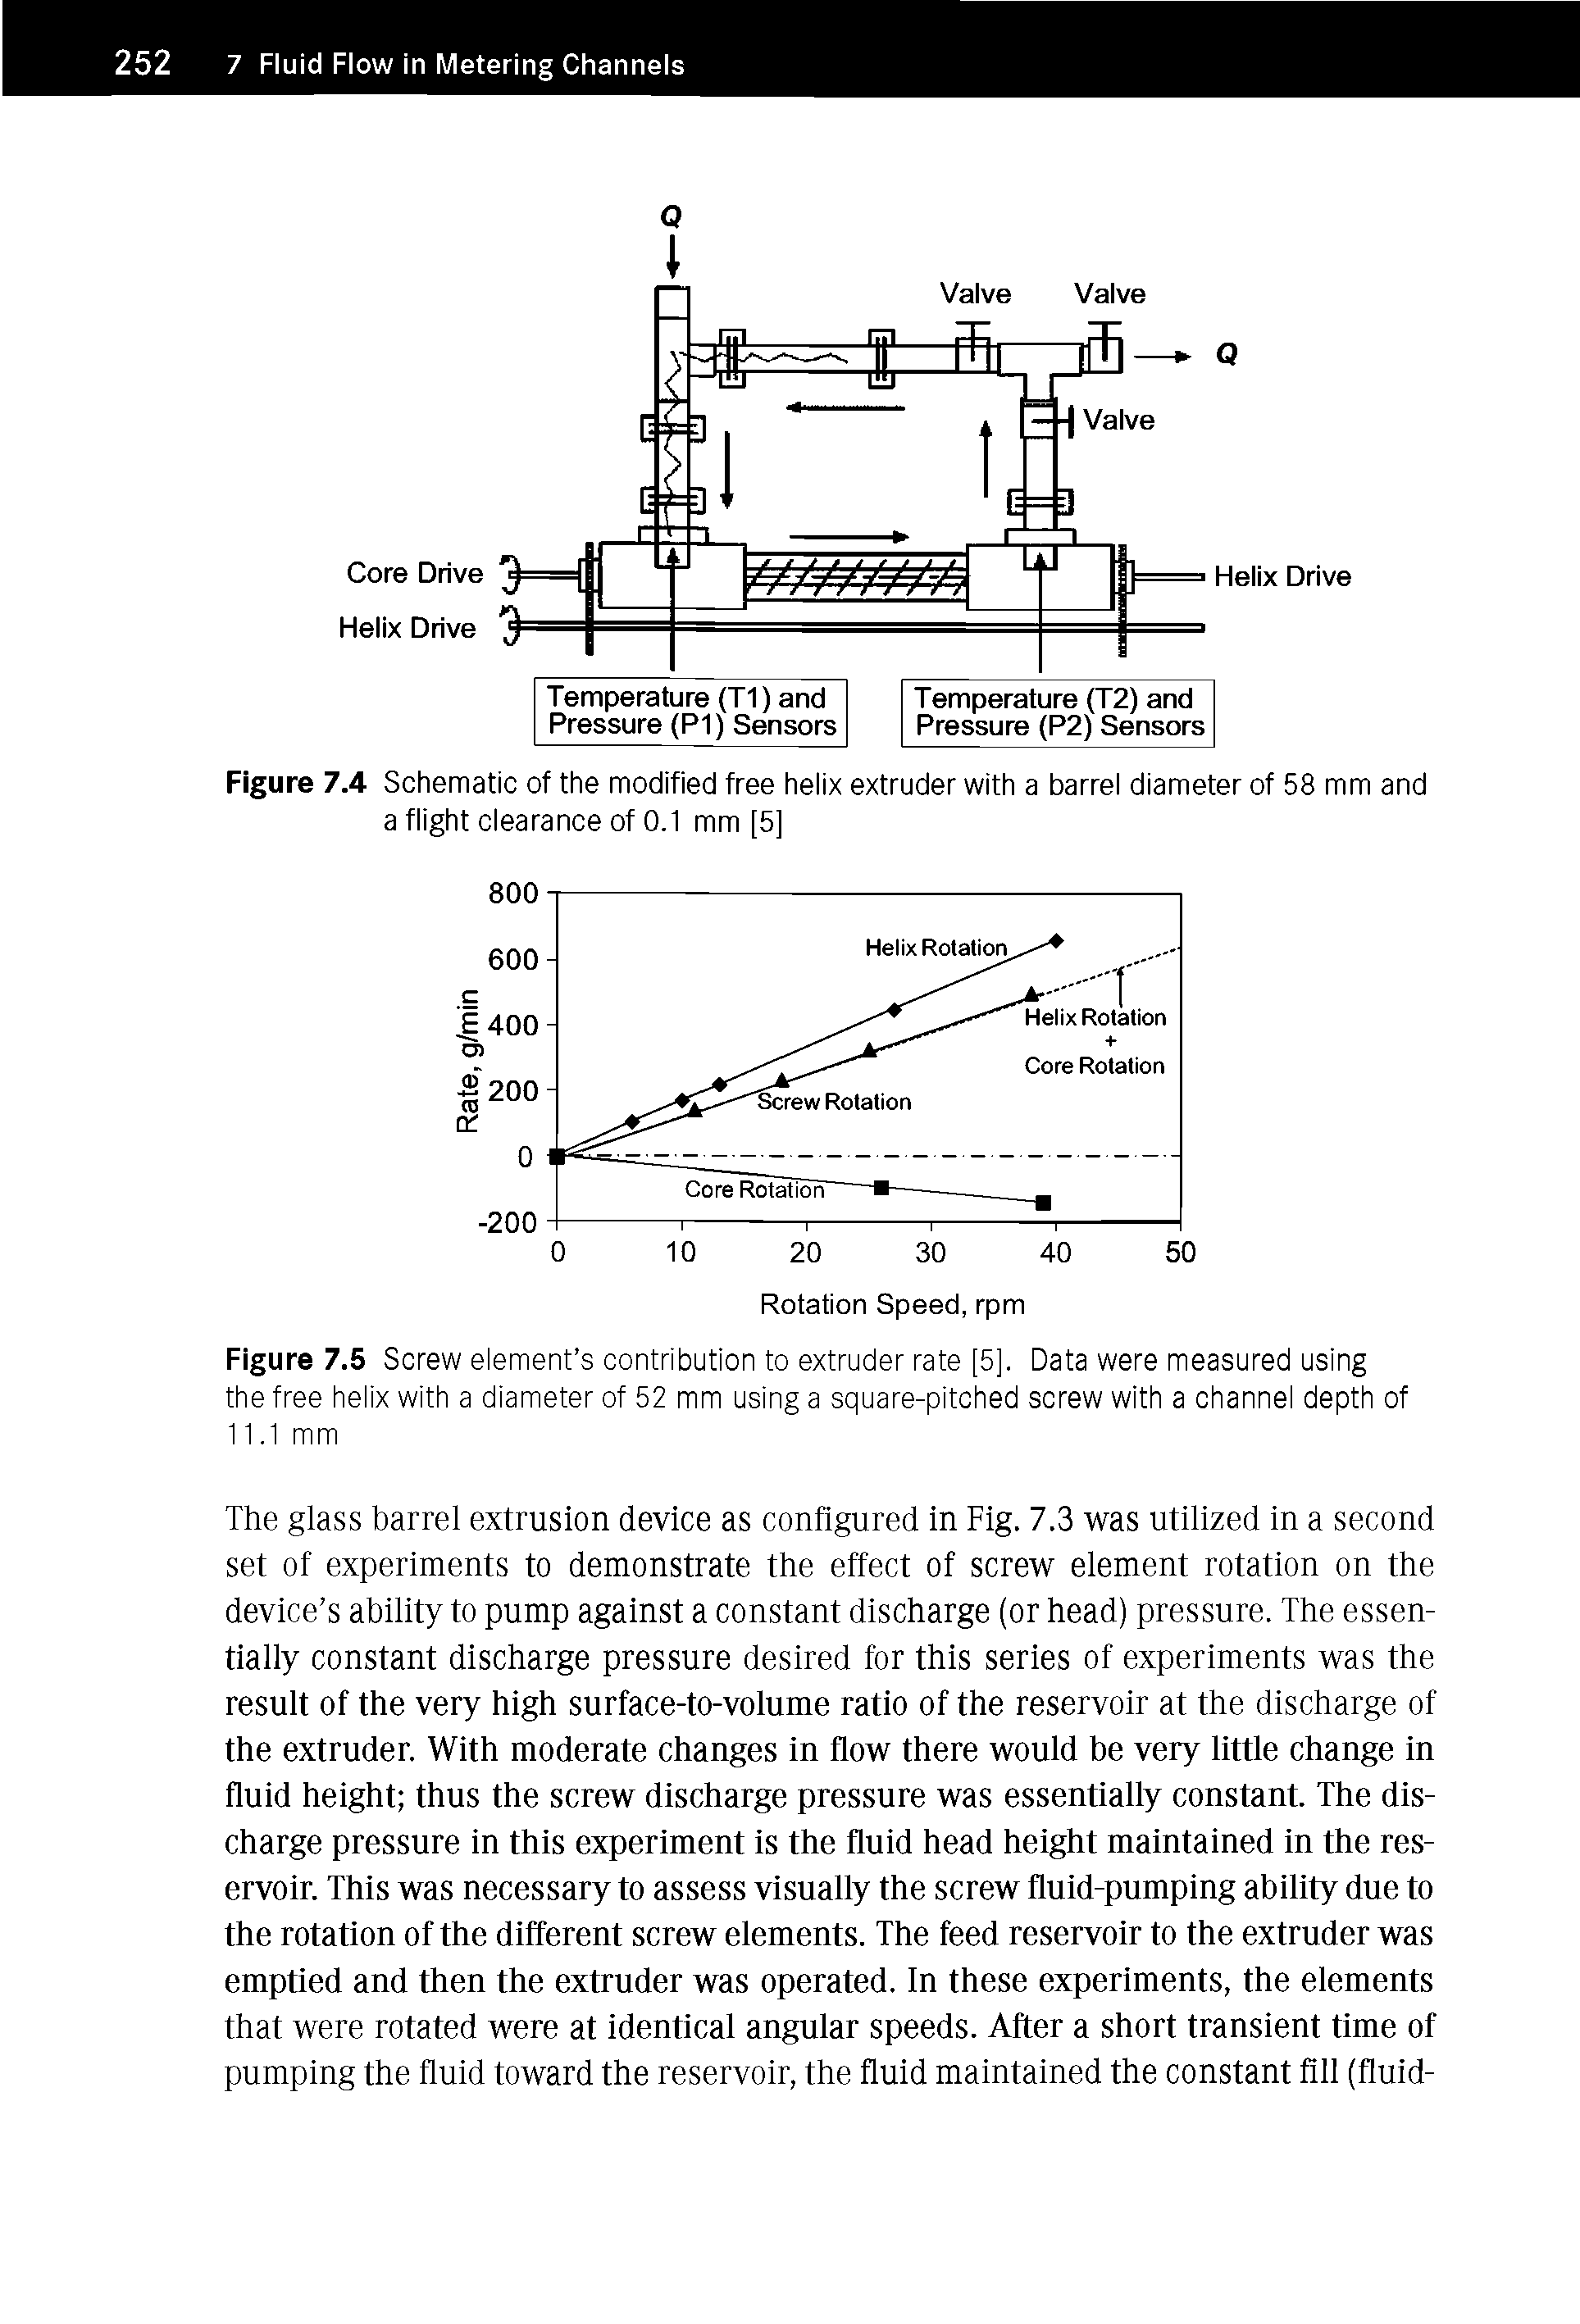 Figure 7.4 Schematic of the modified free helix extruder with a barrel diameter of 58 mm and a flight clearance of 0.1 mm [5]...